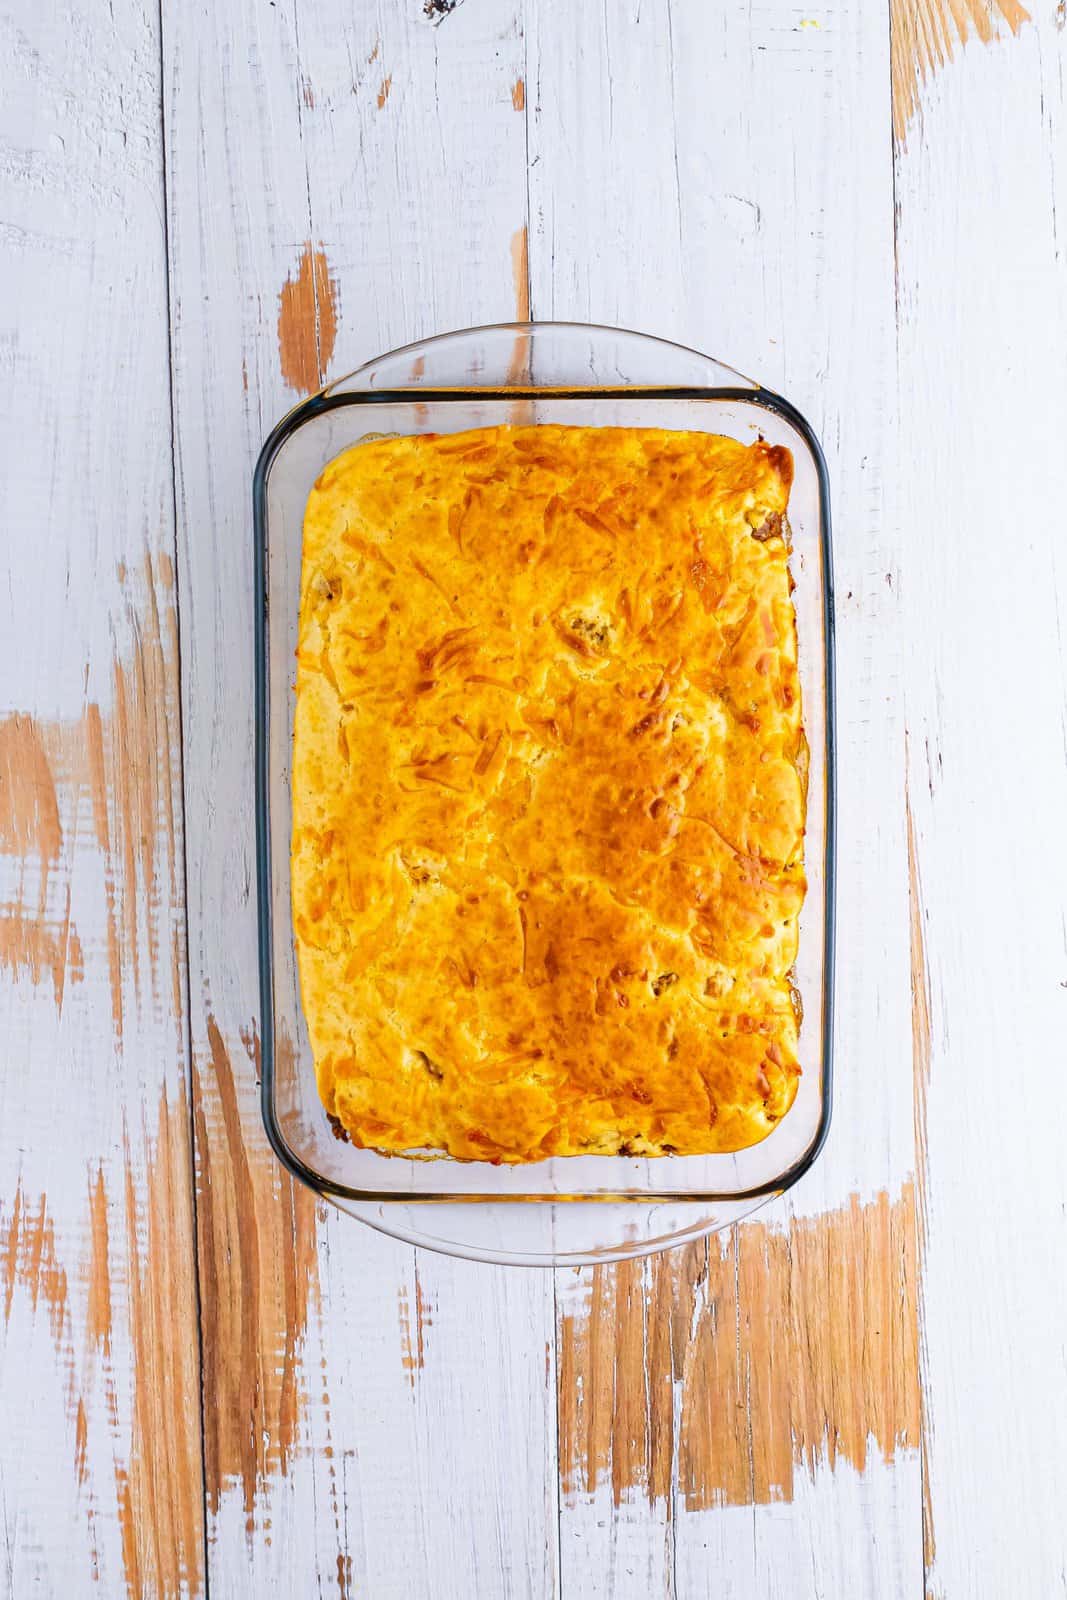 Baking dish with a baked Bisquick taco casserole, without the toppings.